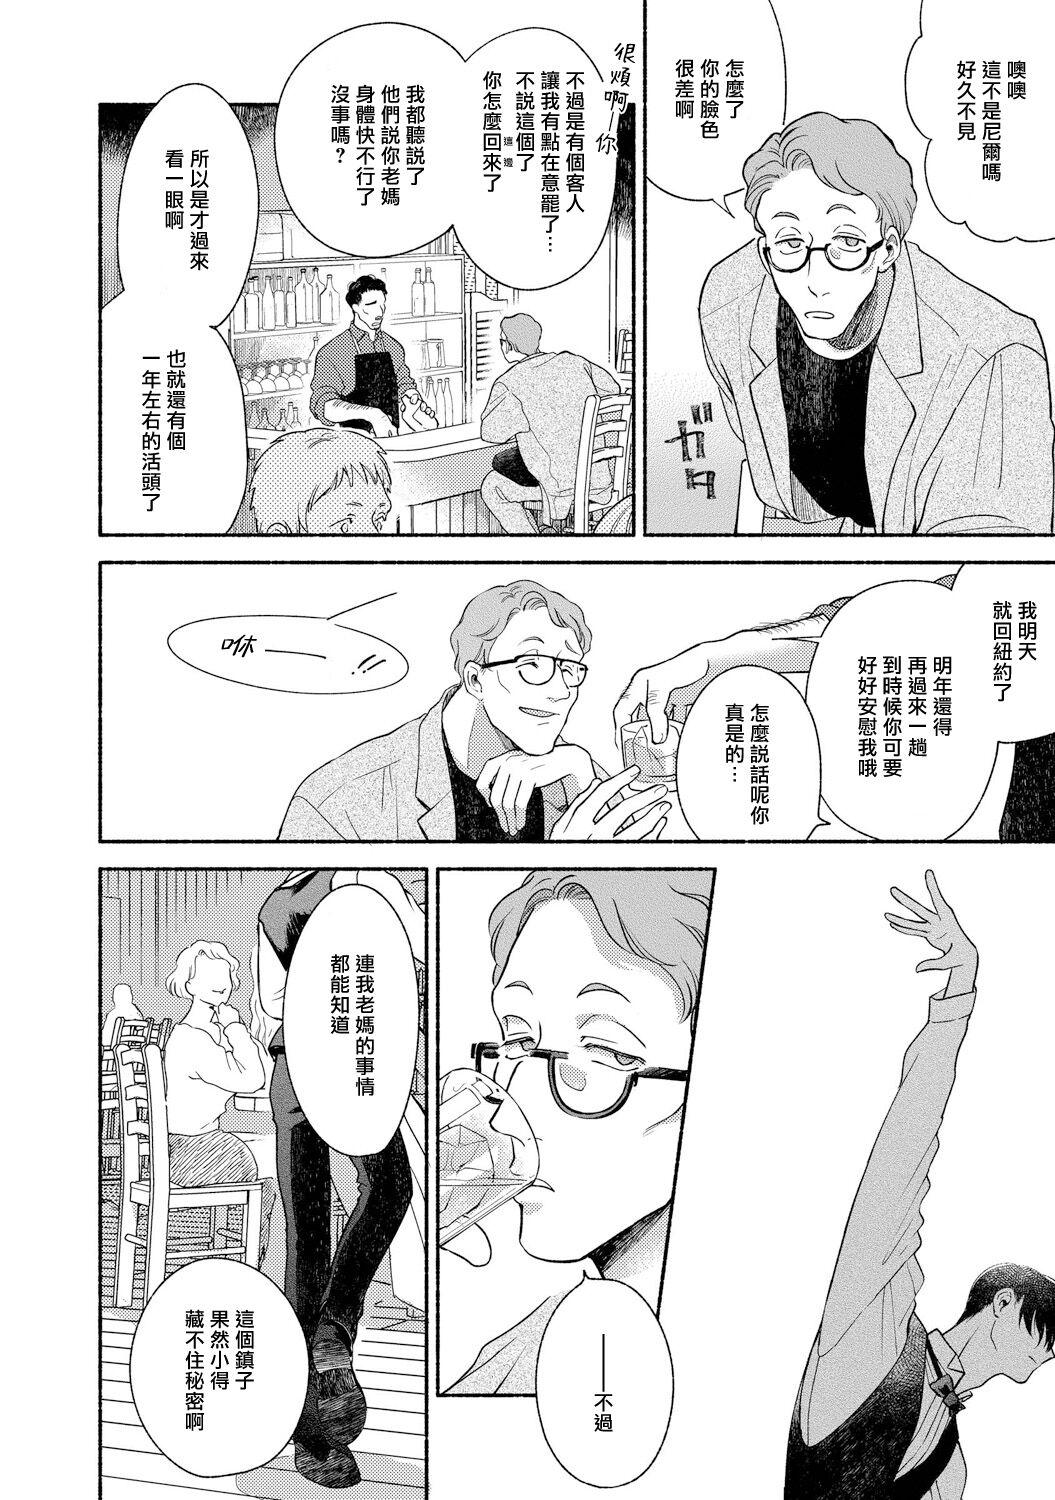 Foreplay Rumspringa no Joukei | 徘徊期少年 Ch. 1-2 Gaping - Page 7